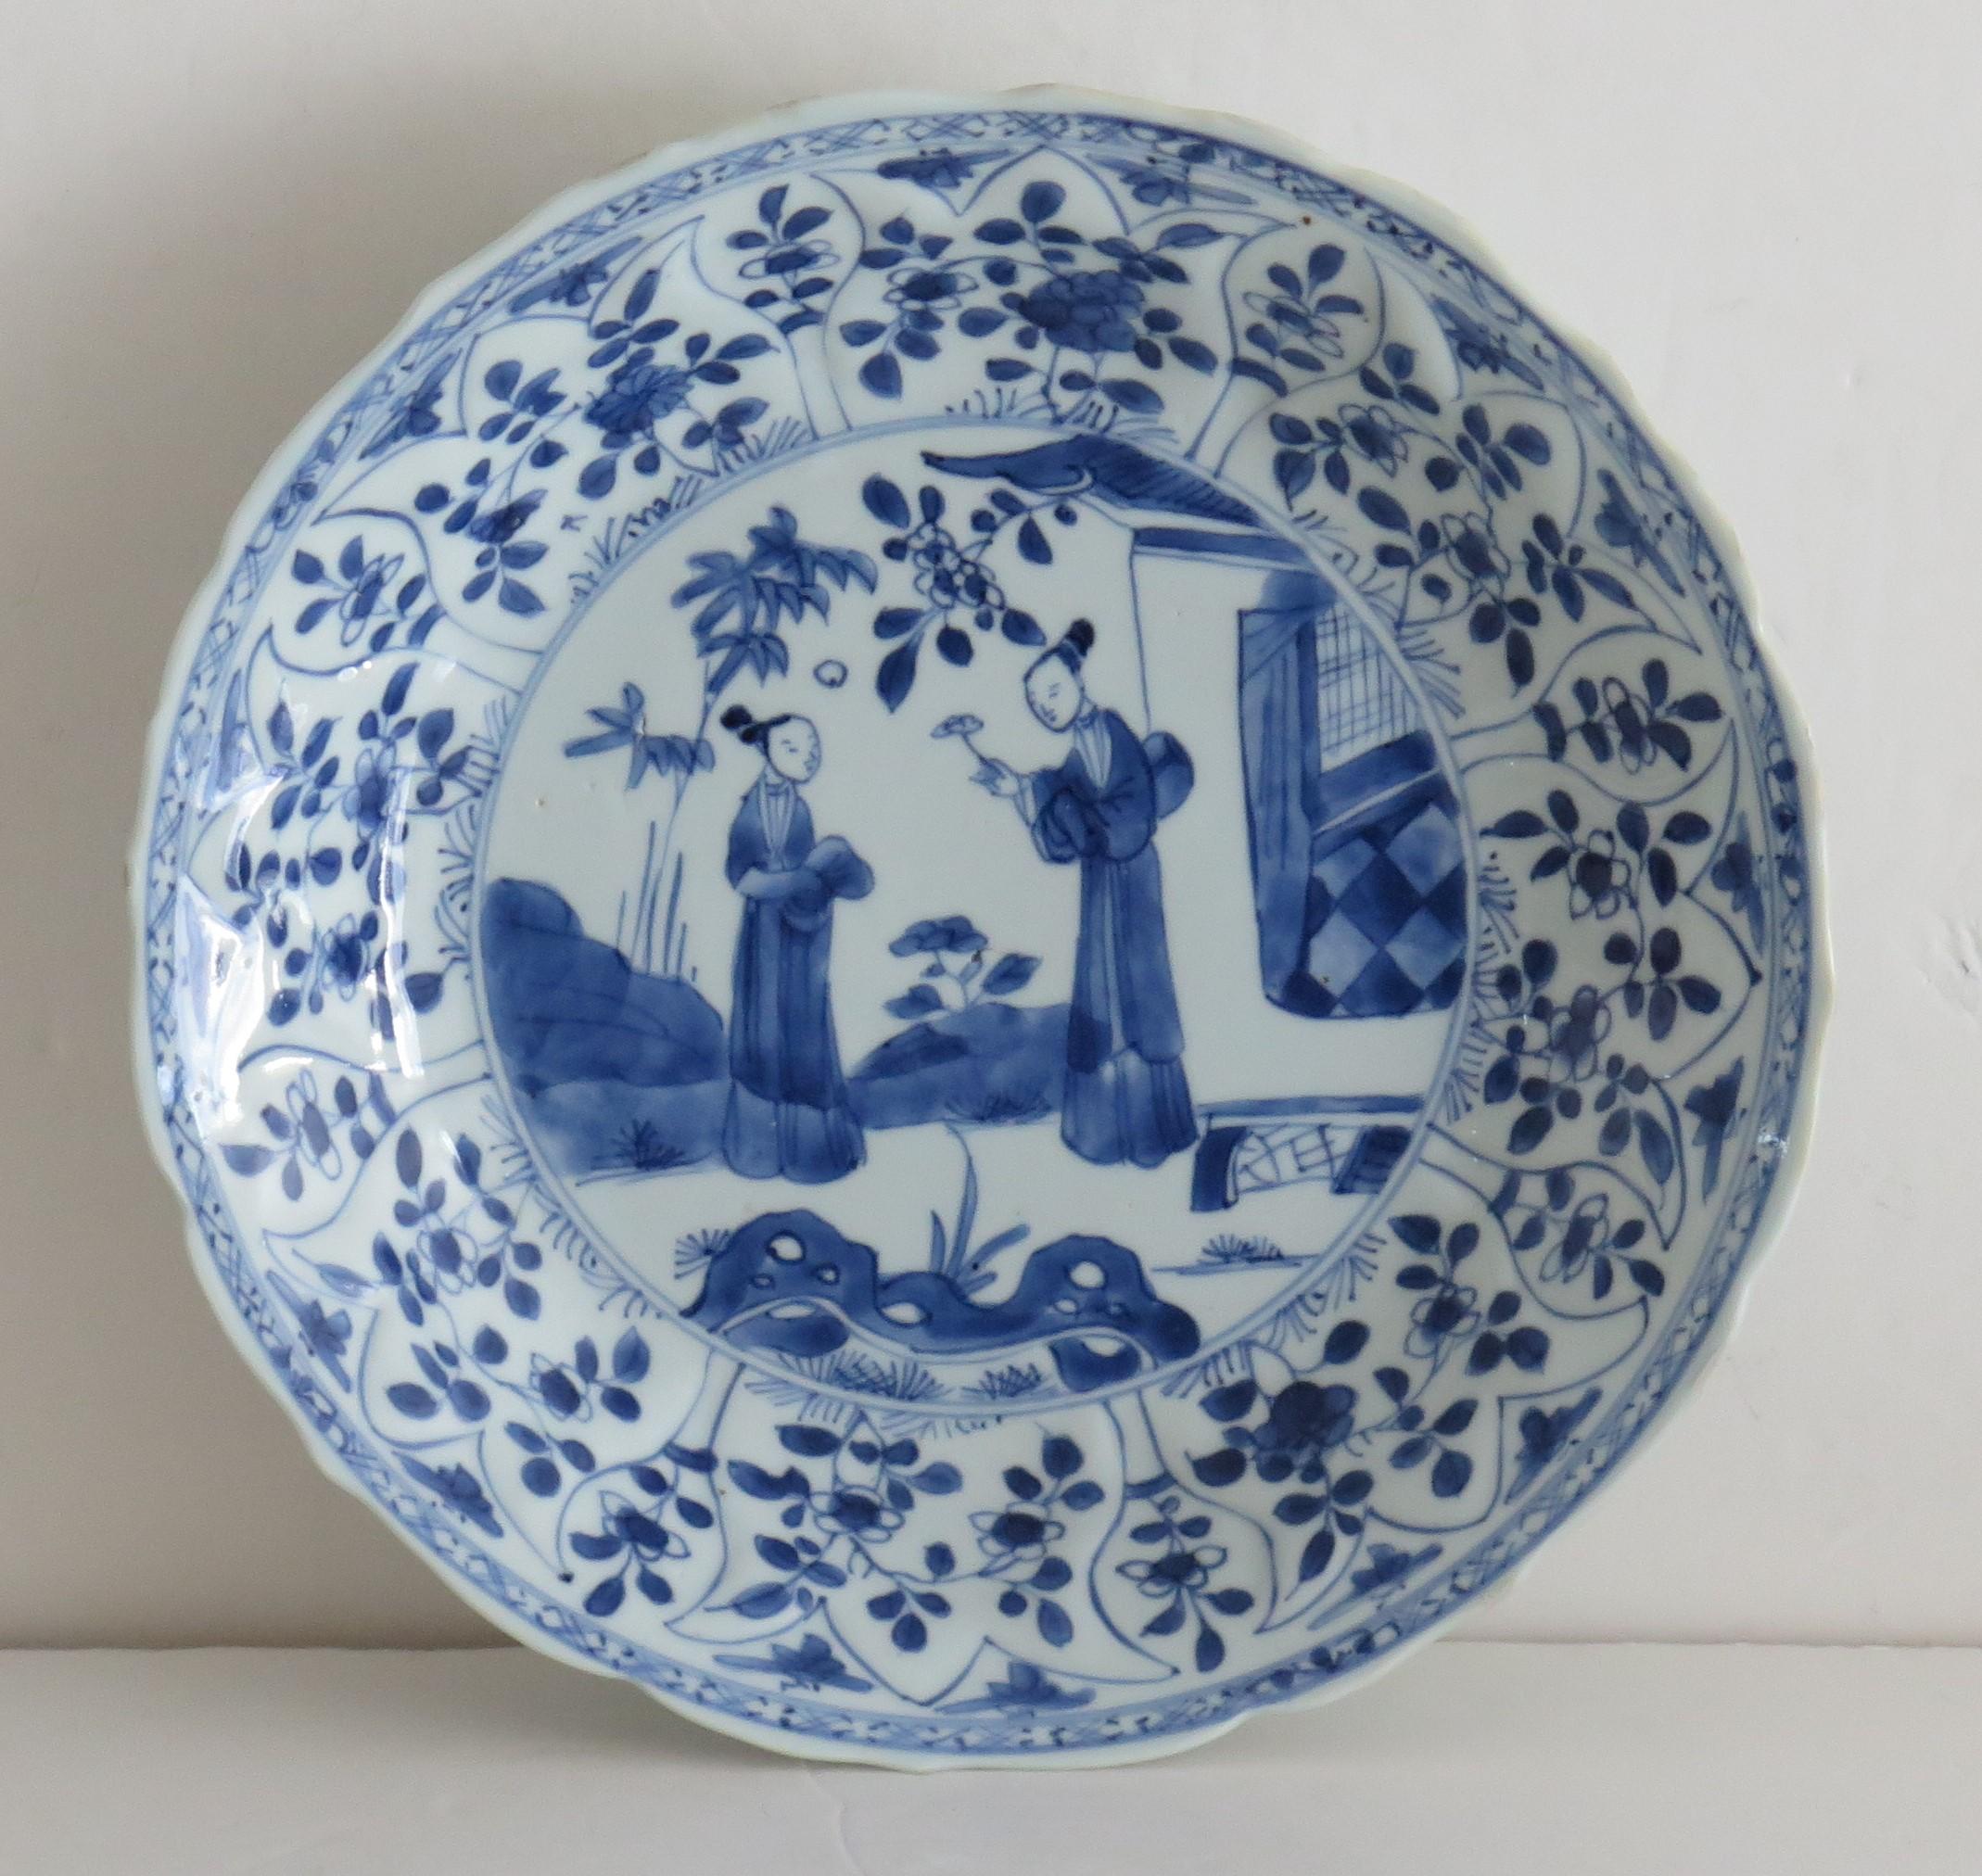 This is a very beautifully hand painted Chinese porcelain blue and white Dish or Plate from the early 18th Century Qing period, either late Kangxi period ( 1662-1722) or Yongzheng period (1723-35).

This is a well potted dish with 8 lobes or ribs,